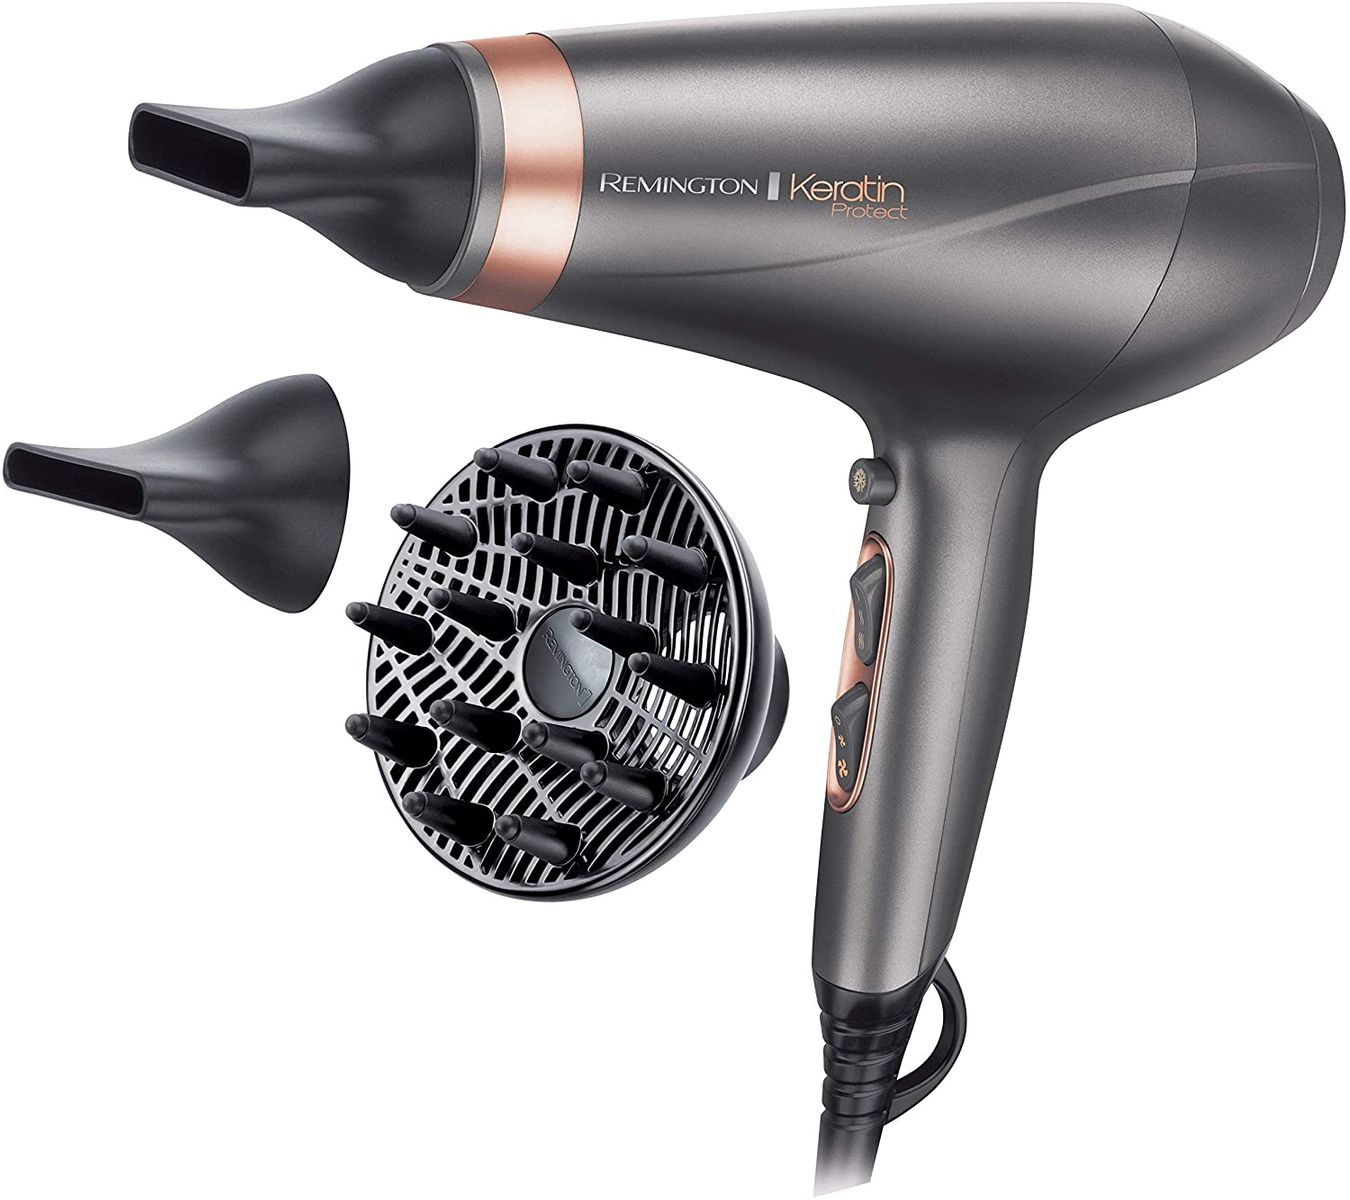 Remington Hair Dryer Professional Ionic Keratin Protect (2200W, 150km/h, 3 styling attachments, enriched with keratin and almond oil, ionic care - anti-frizz, long-lasting AC motor) AC8820